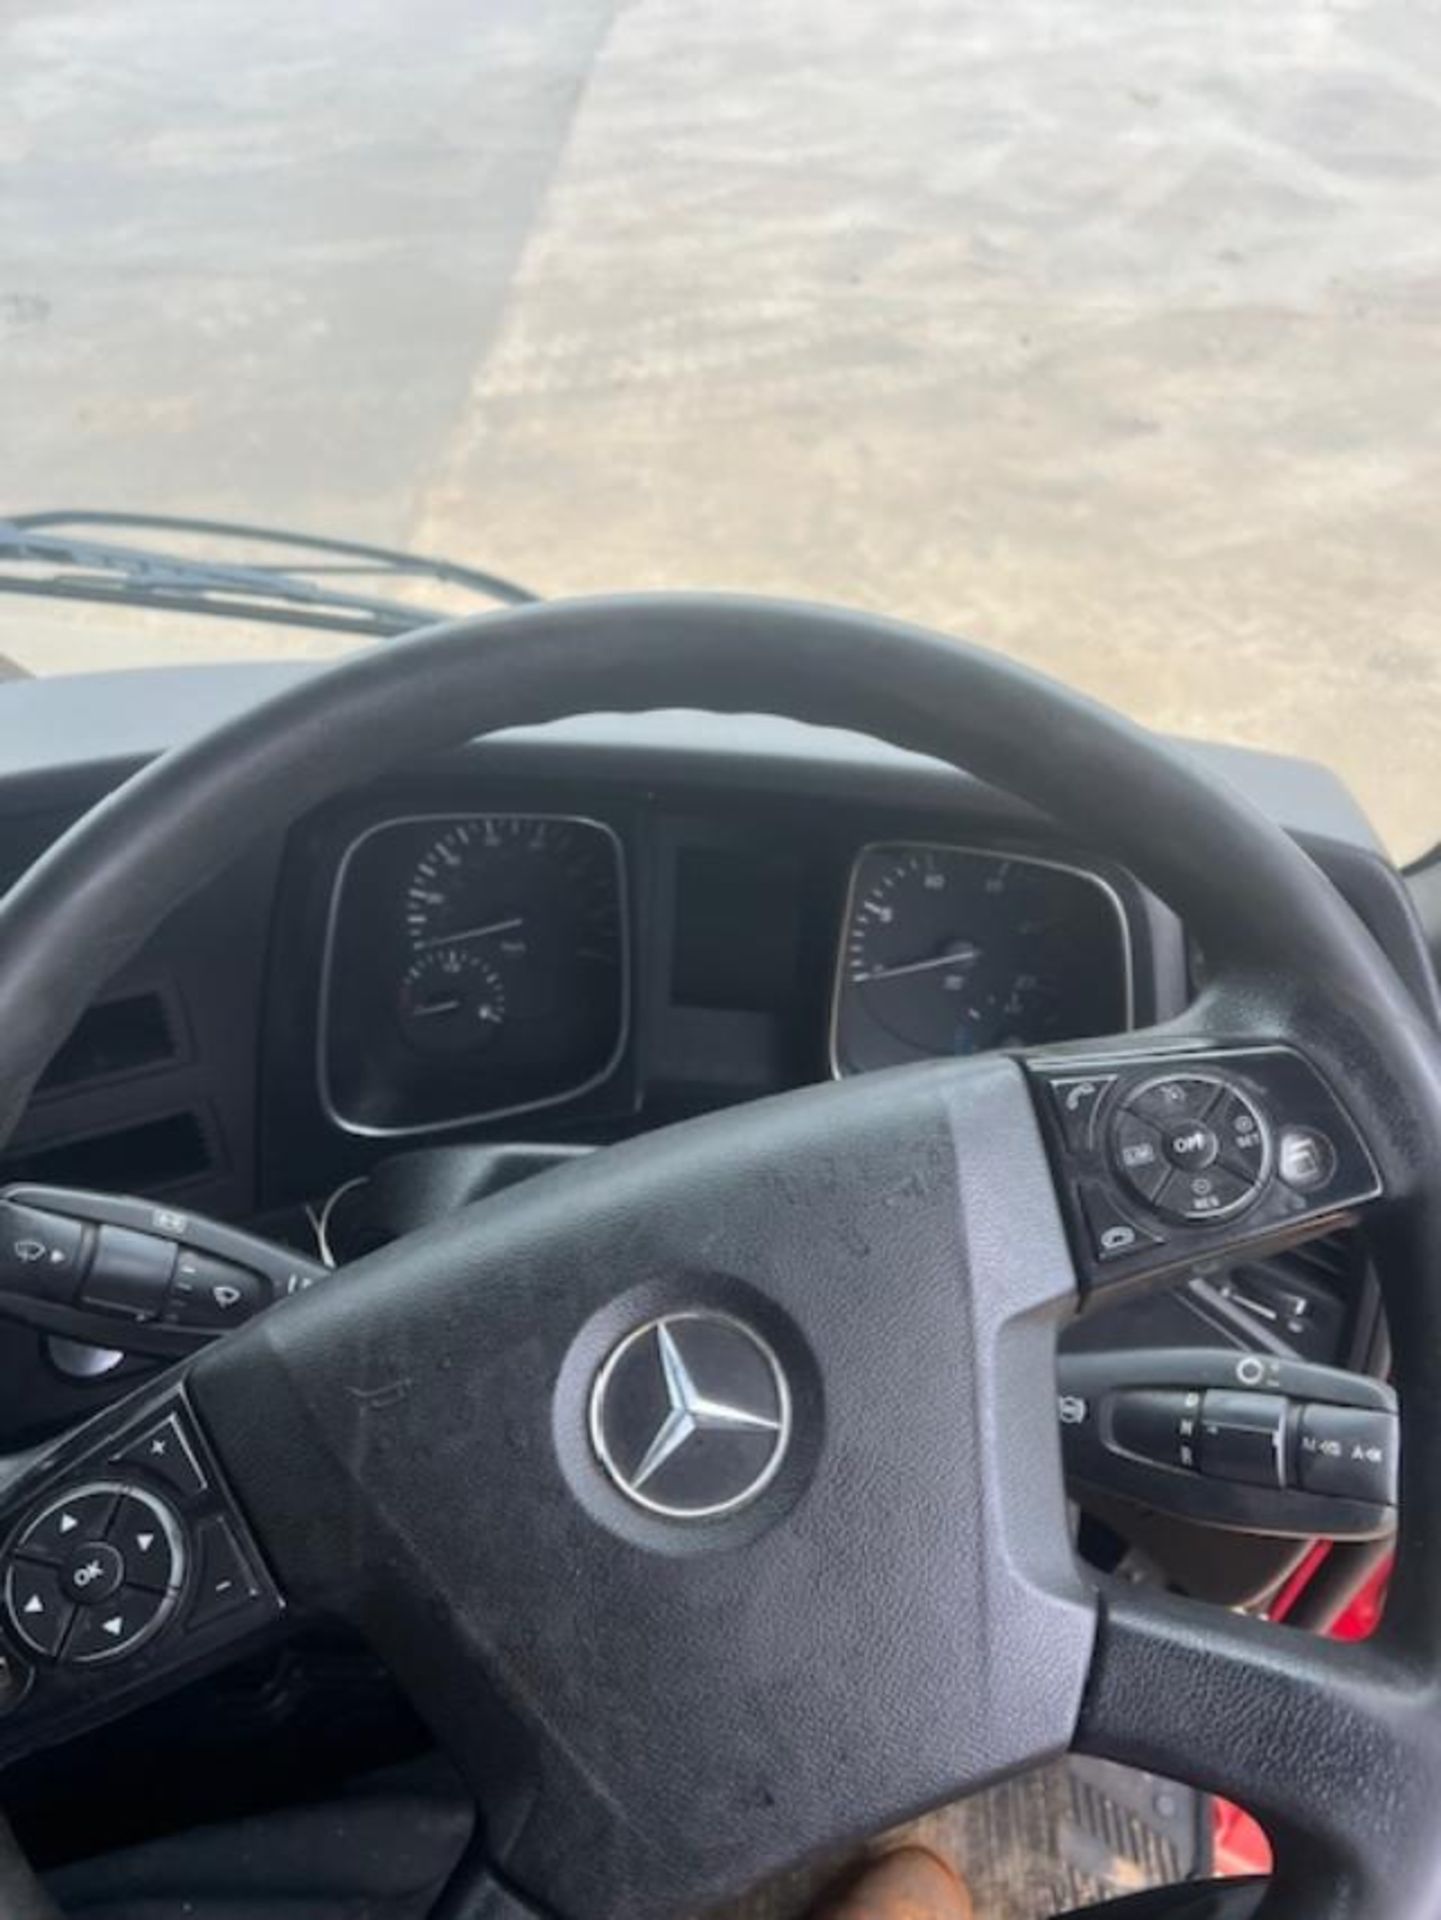 2014 Mercedes Actros 2545 - Image 2 of 15